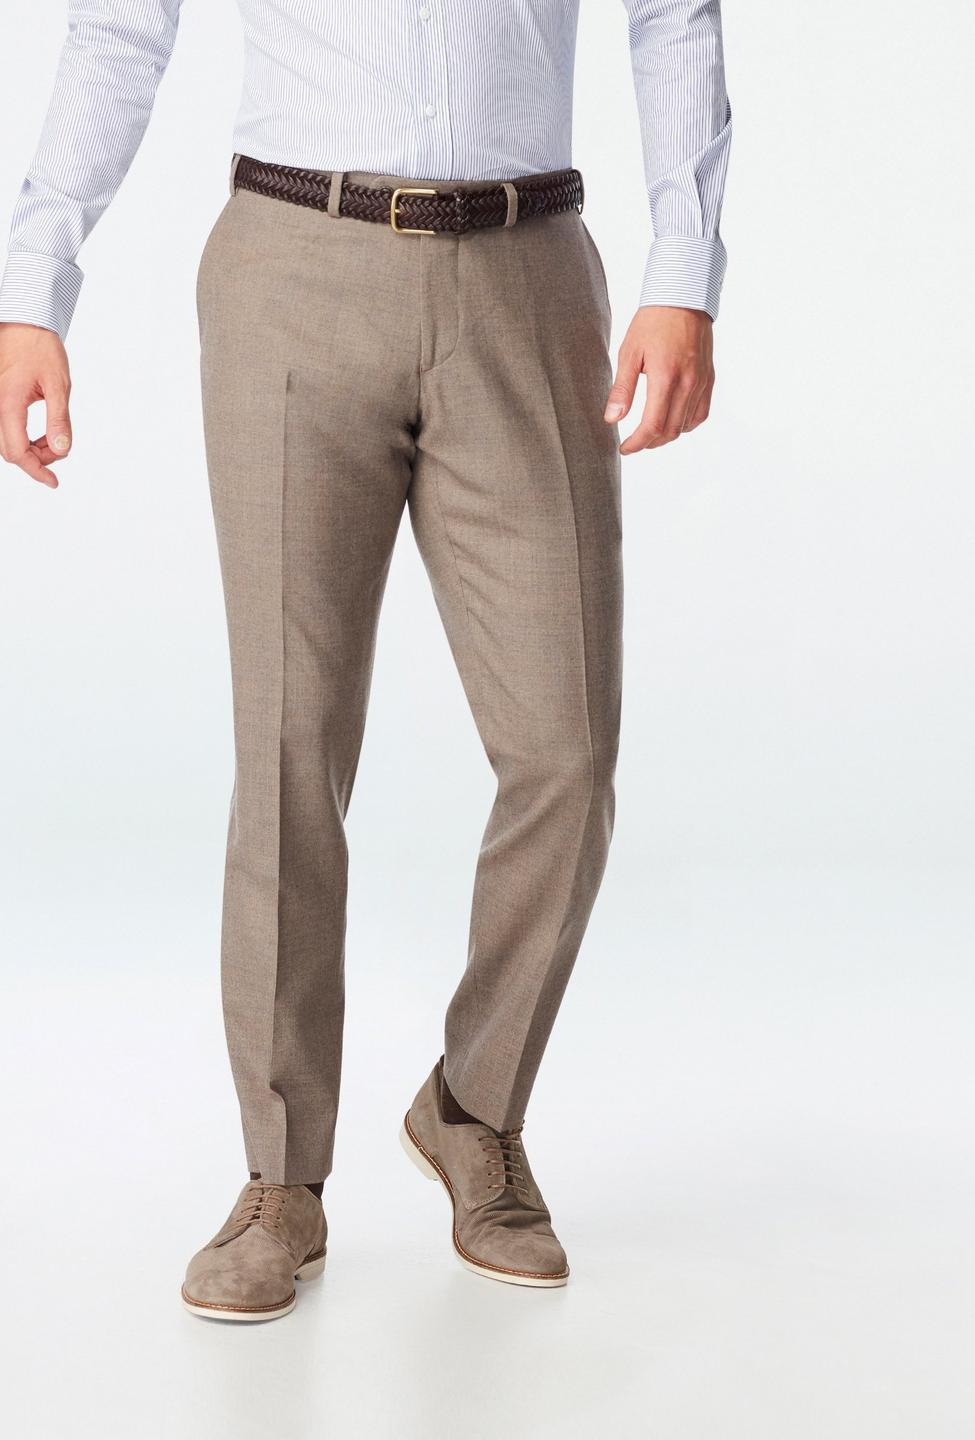 Brown pants - Hayward Solid Design from Luxury Indochino Collection